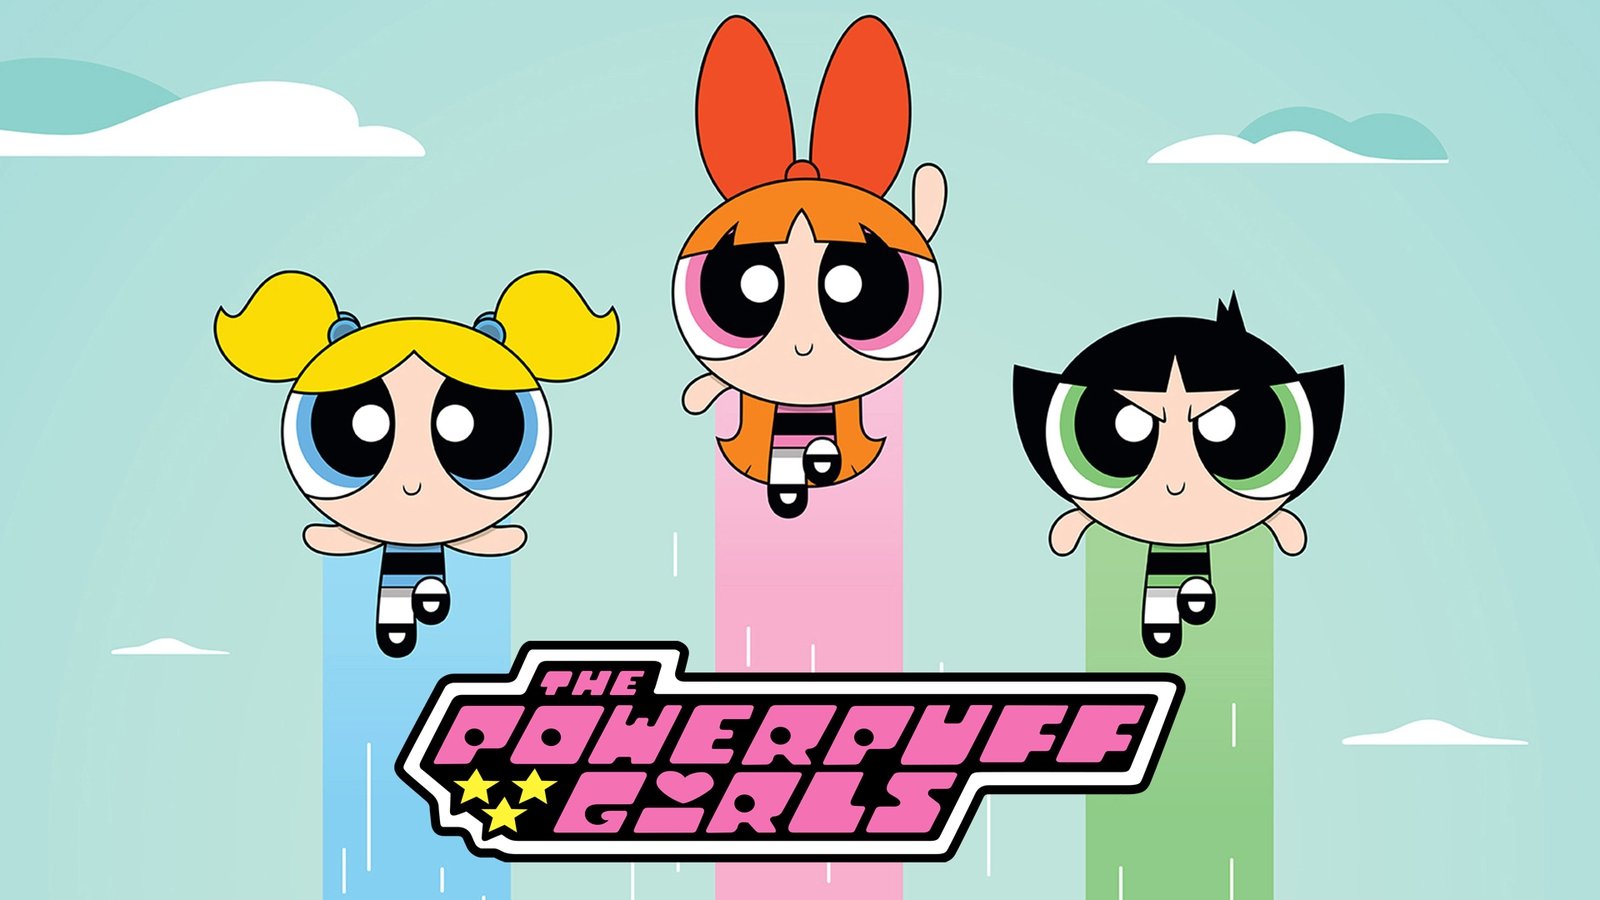 Cancelling The CW's Powerpuff Girls Was a Good Thing - Here's Why